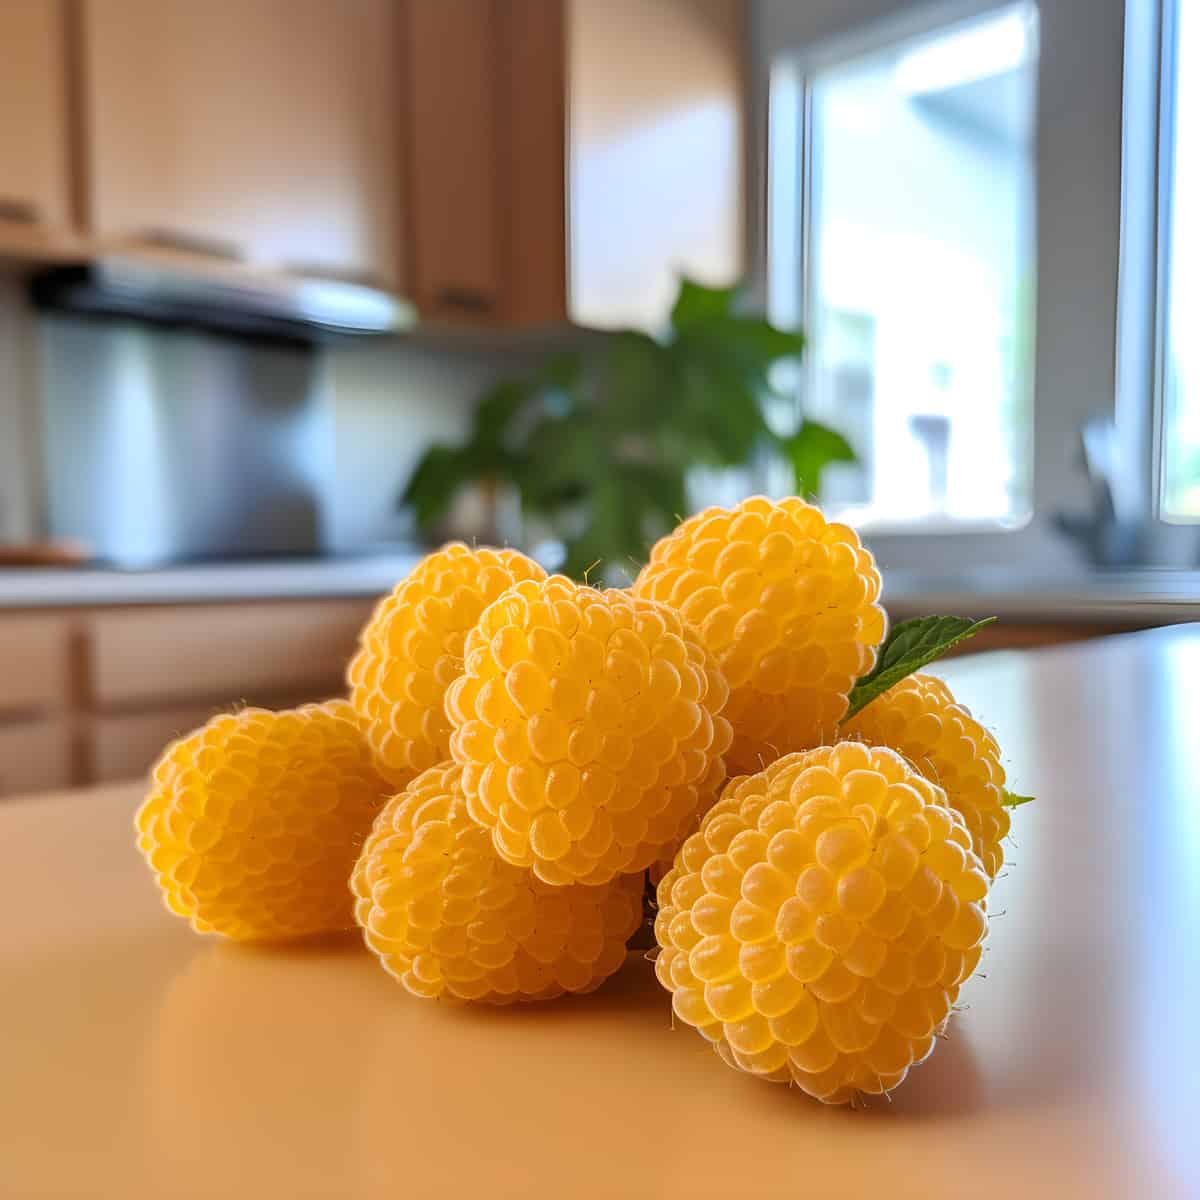 Golden Himalayan Raspberries on a kitchen counter